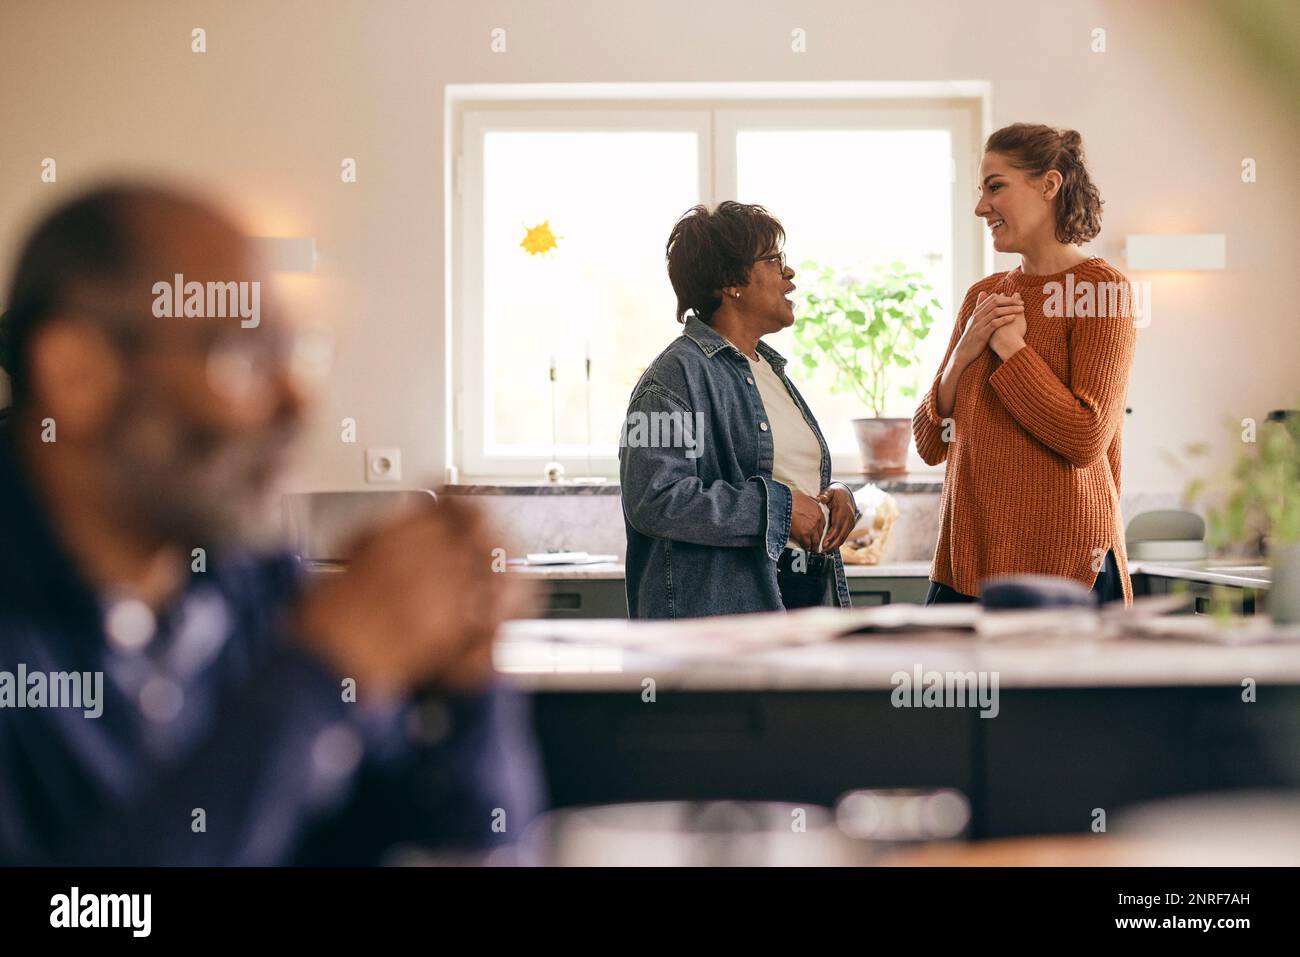 Woman with hands on chest talking to mother-in-law standing in kitchen at home Stock Photo